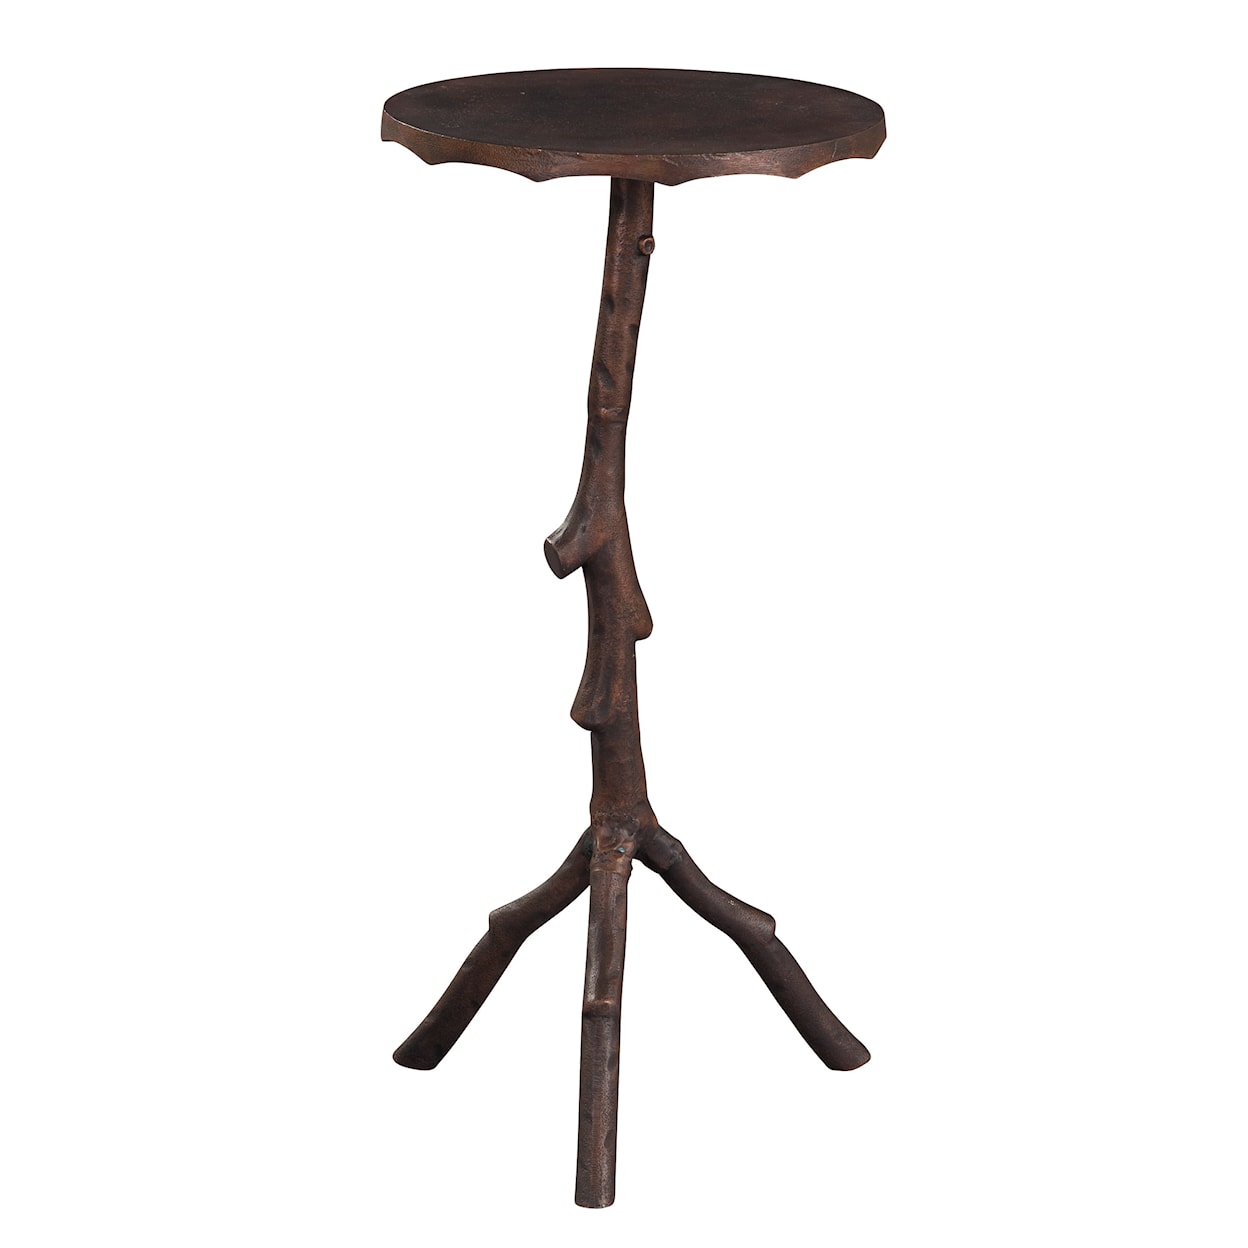 Hekman Accents Twig Shaped Side Table